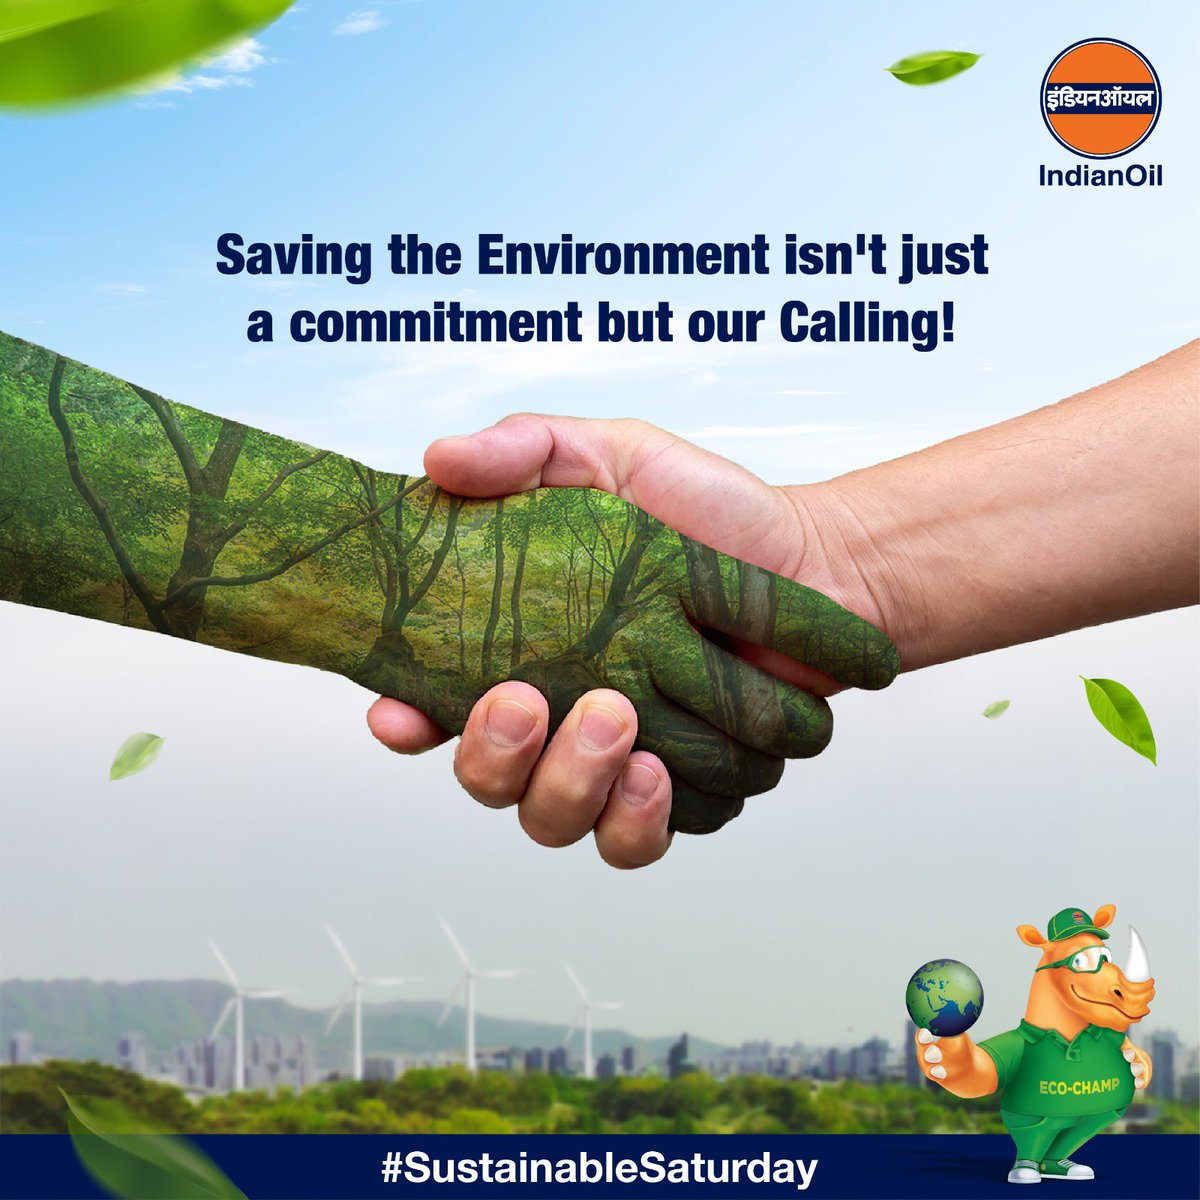 Post Copy: From rooftop solar installations to cutting-edge indoor solar cooking systems, #IndianOil is at the forefront of championing a circular economy and paving the way for a greener, more sustainable future. Our commitment extends beyond conventional boundaries as we…